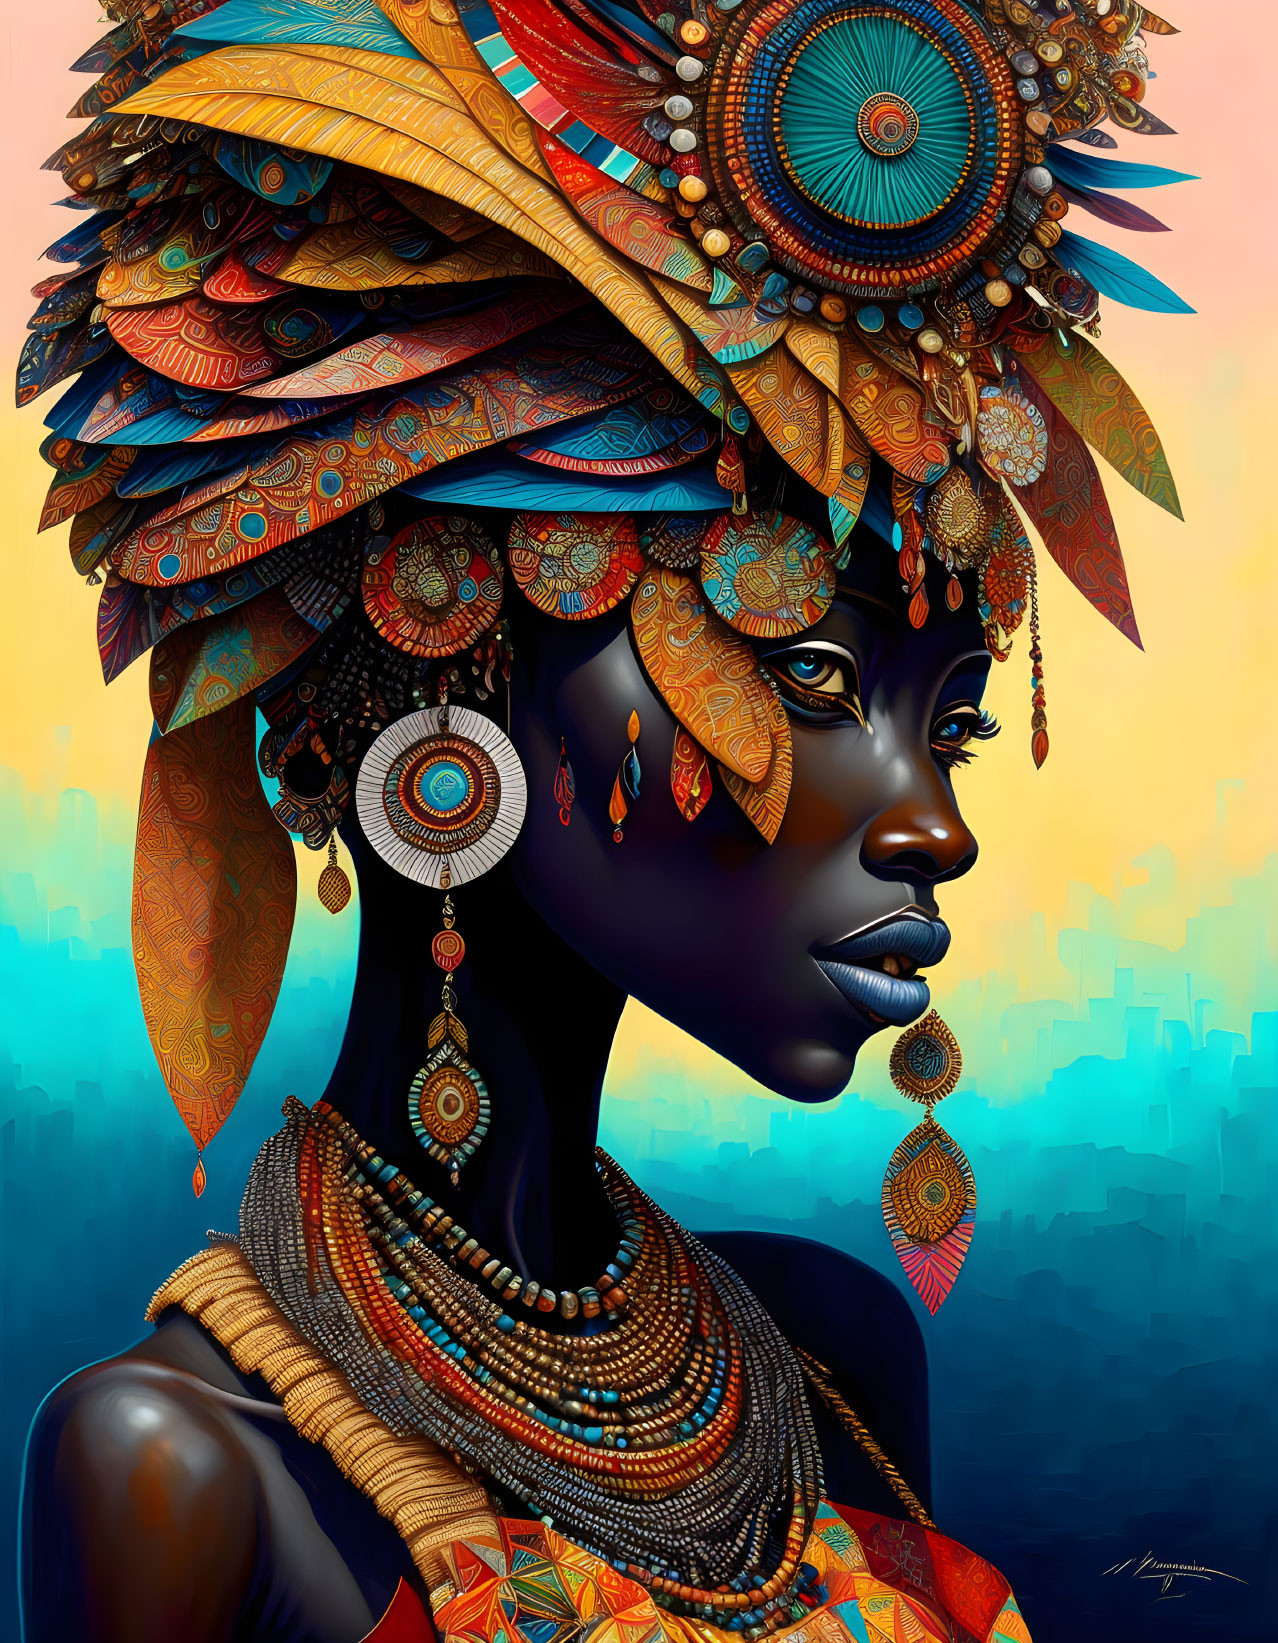 Colorful Portrait of Woman in African Attire & Jewelry